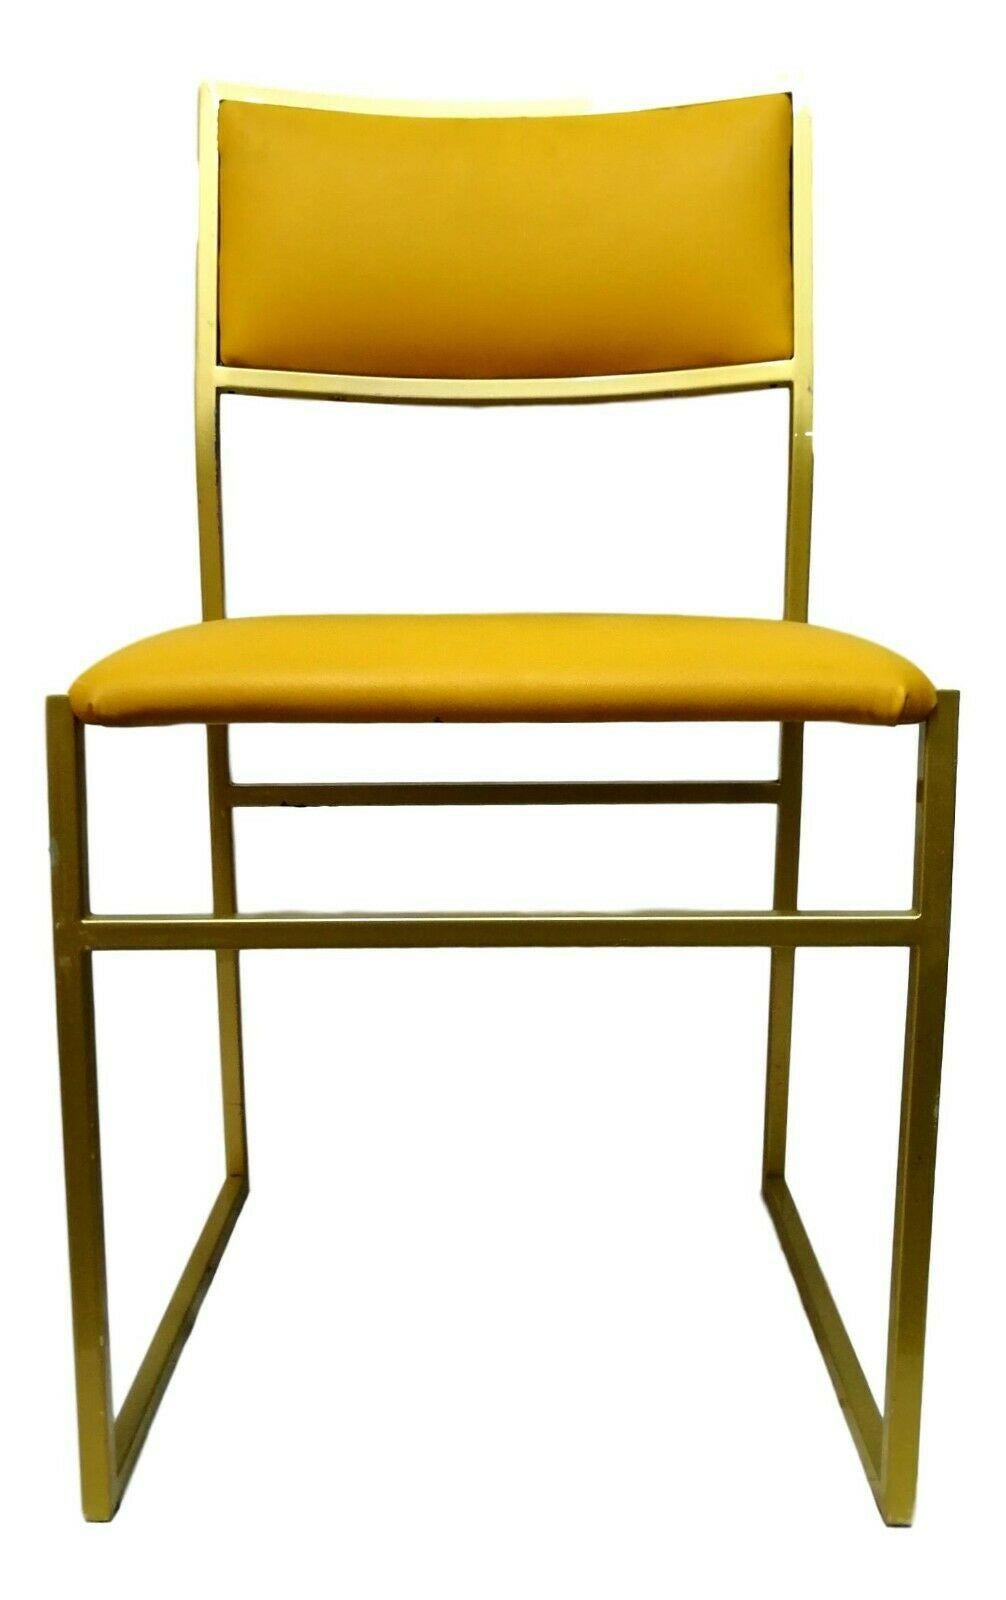 Collectible Chair in Gold Metal and Yellow Upholstery, 1970s In Good Condition For Sale In taranto, IT